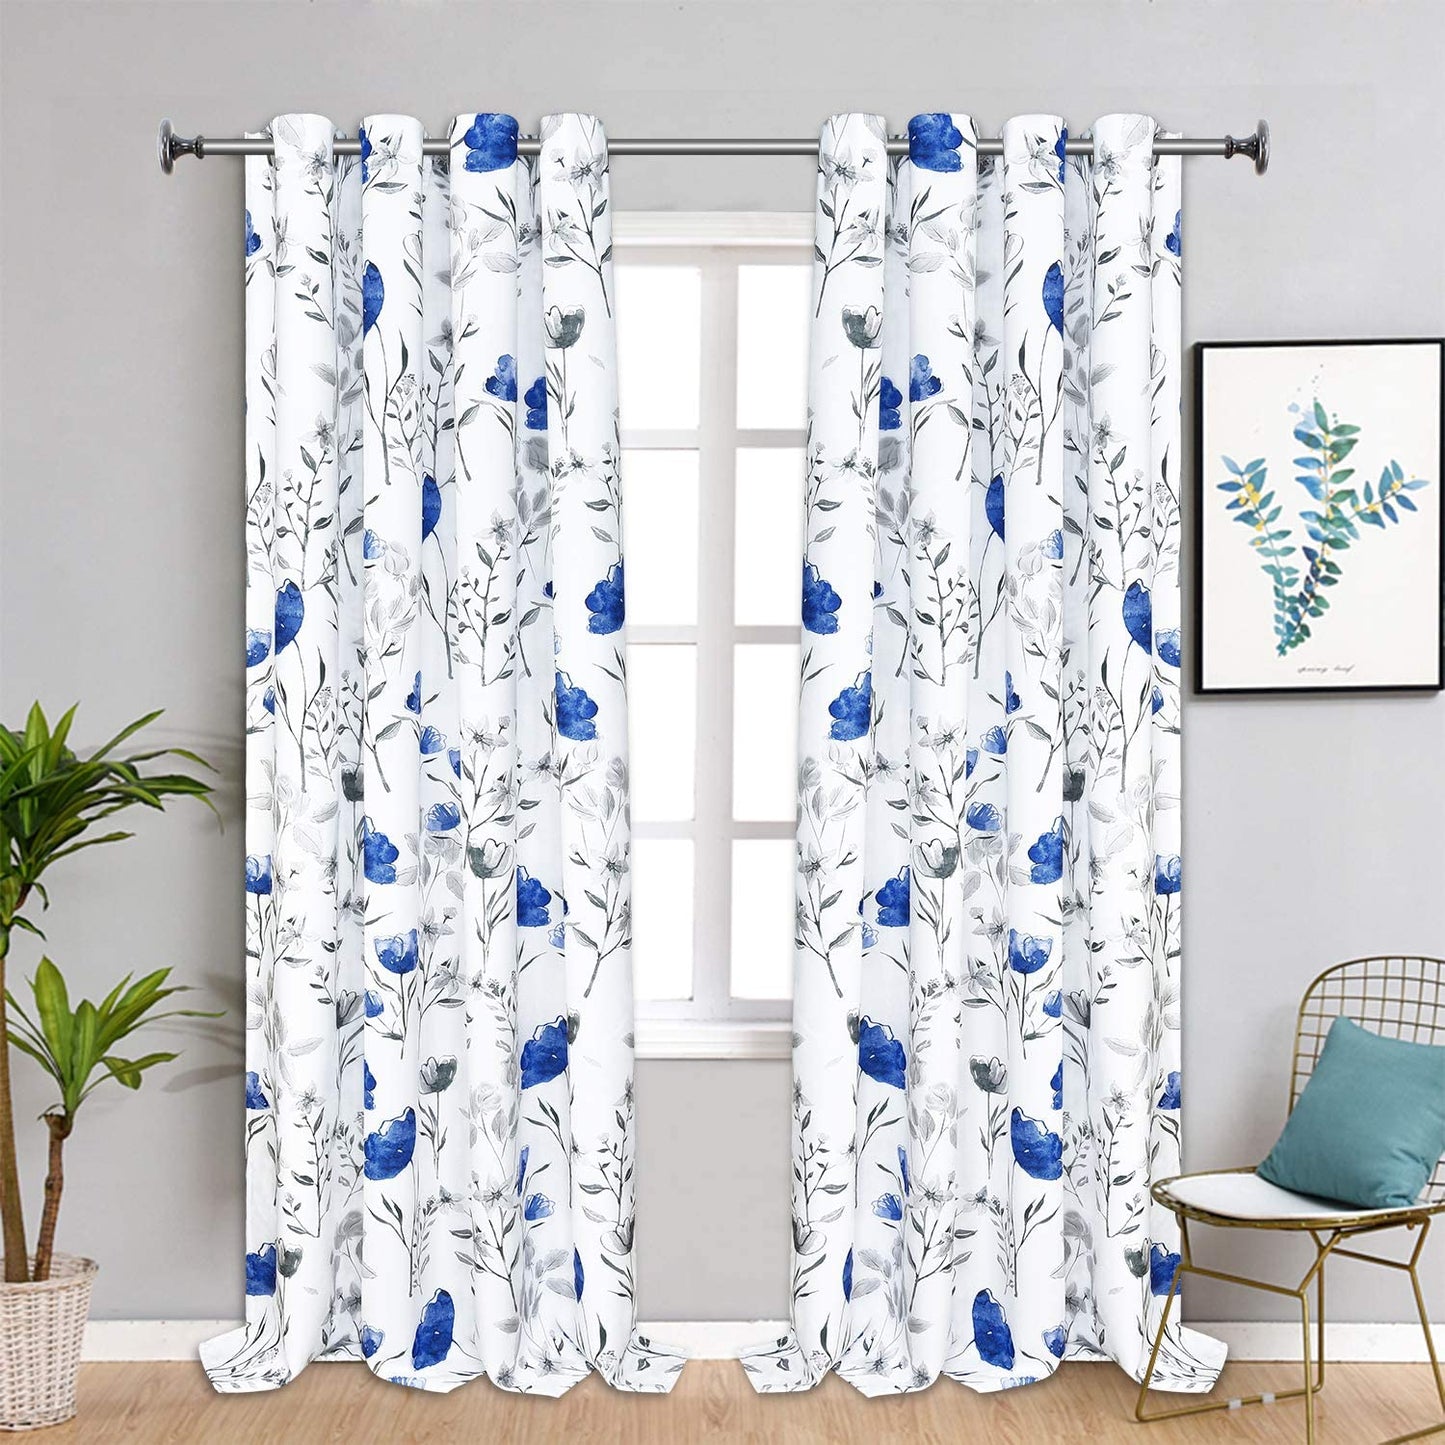 Likiyol Floral Kithchen Curtains 36 Inch Watercolor Flower Leaves Tier Curtains, Yellow and Gray Floral Cafe Curtains, Rod Pocket Small Window Curtain for Cafe Bathroom Bedroom Drapes  Likiyol Blue 84"L X 52"W 